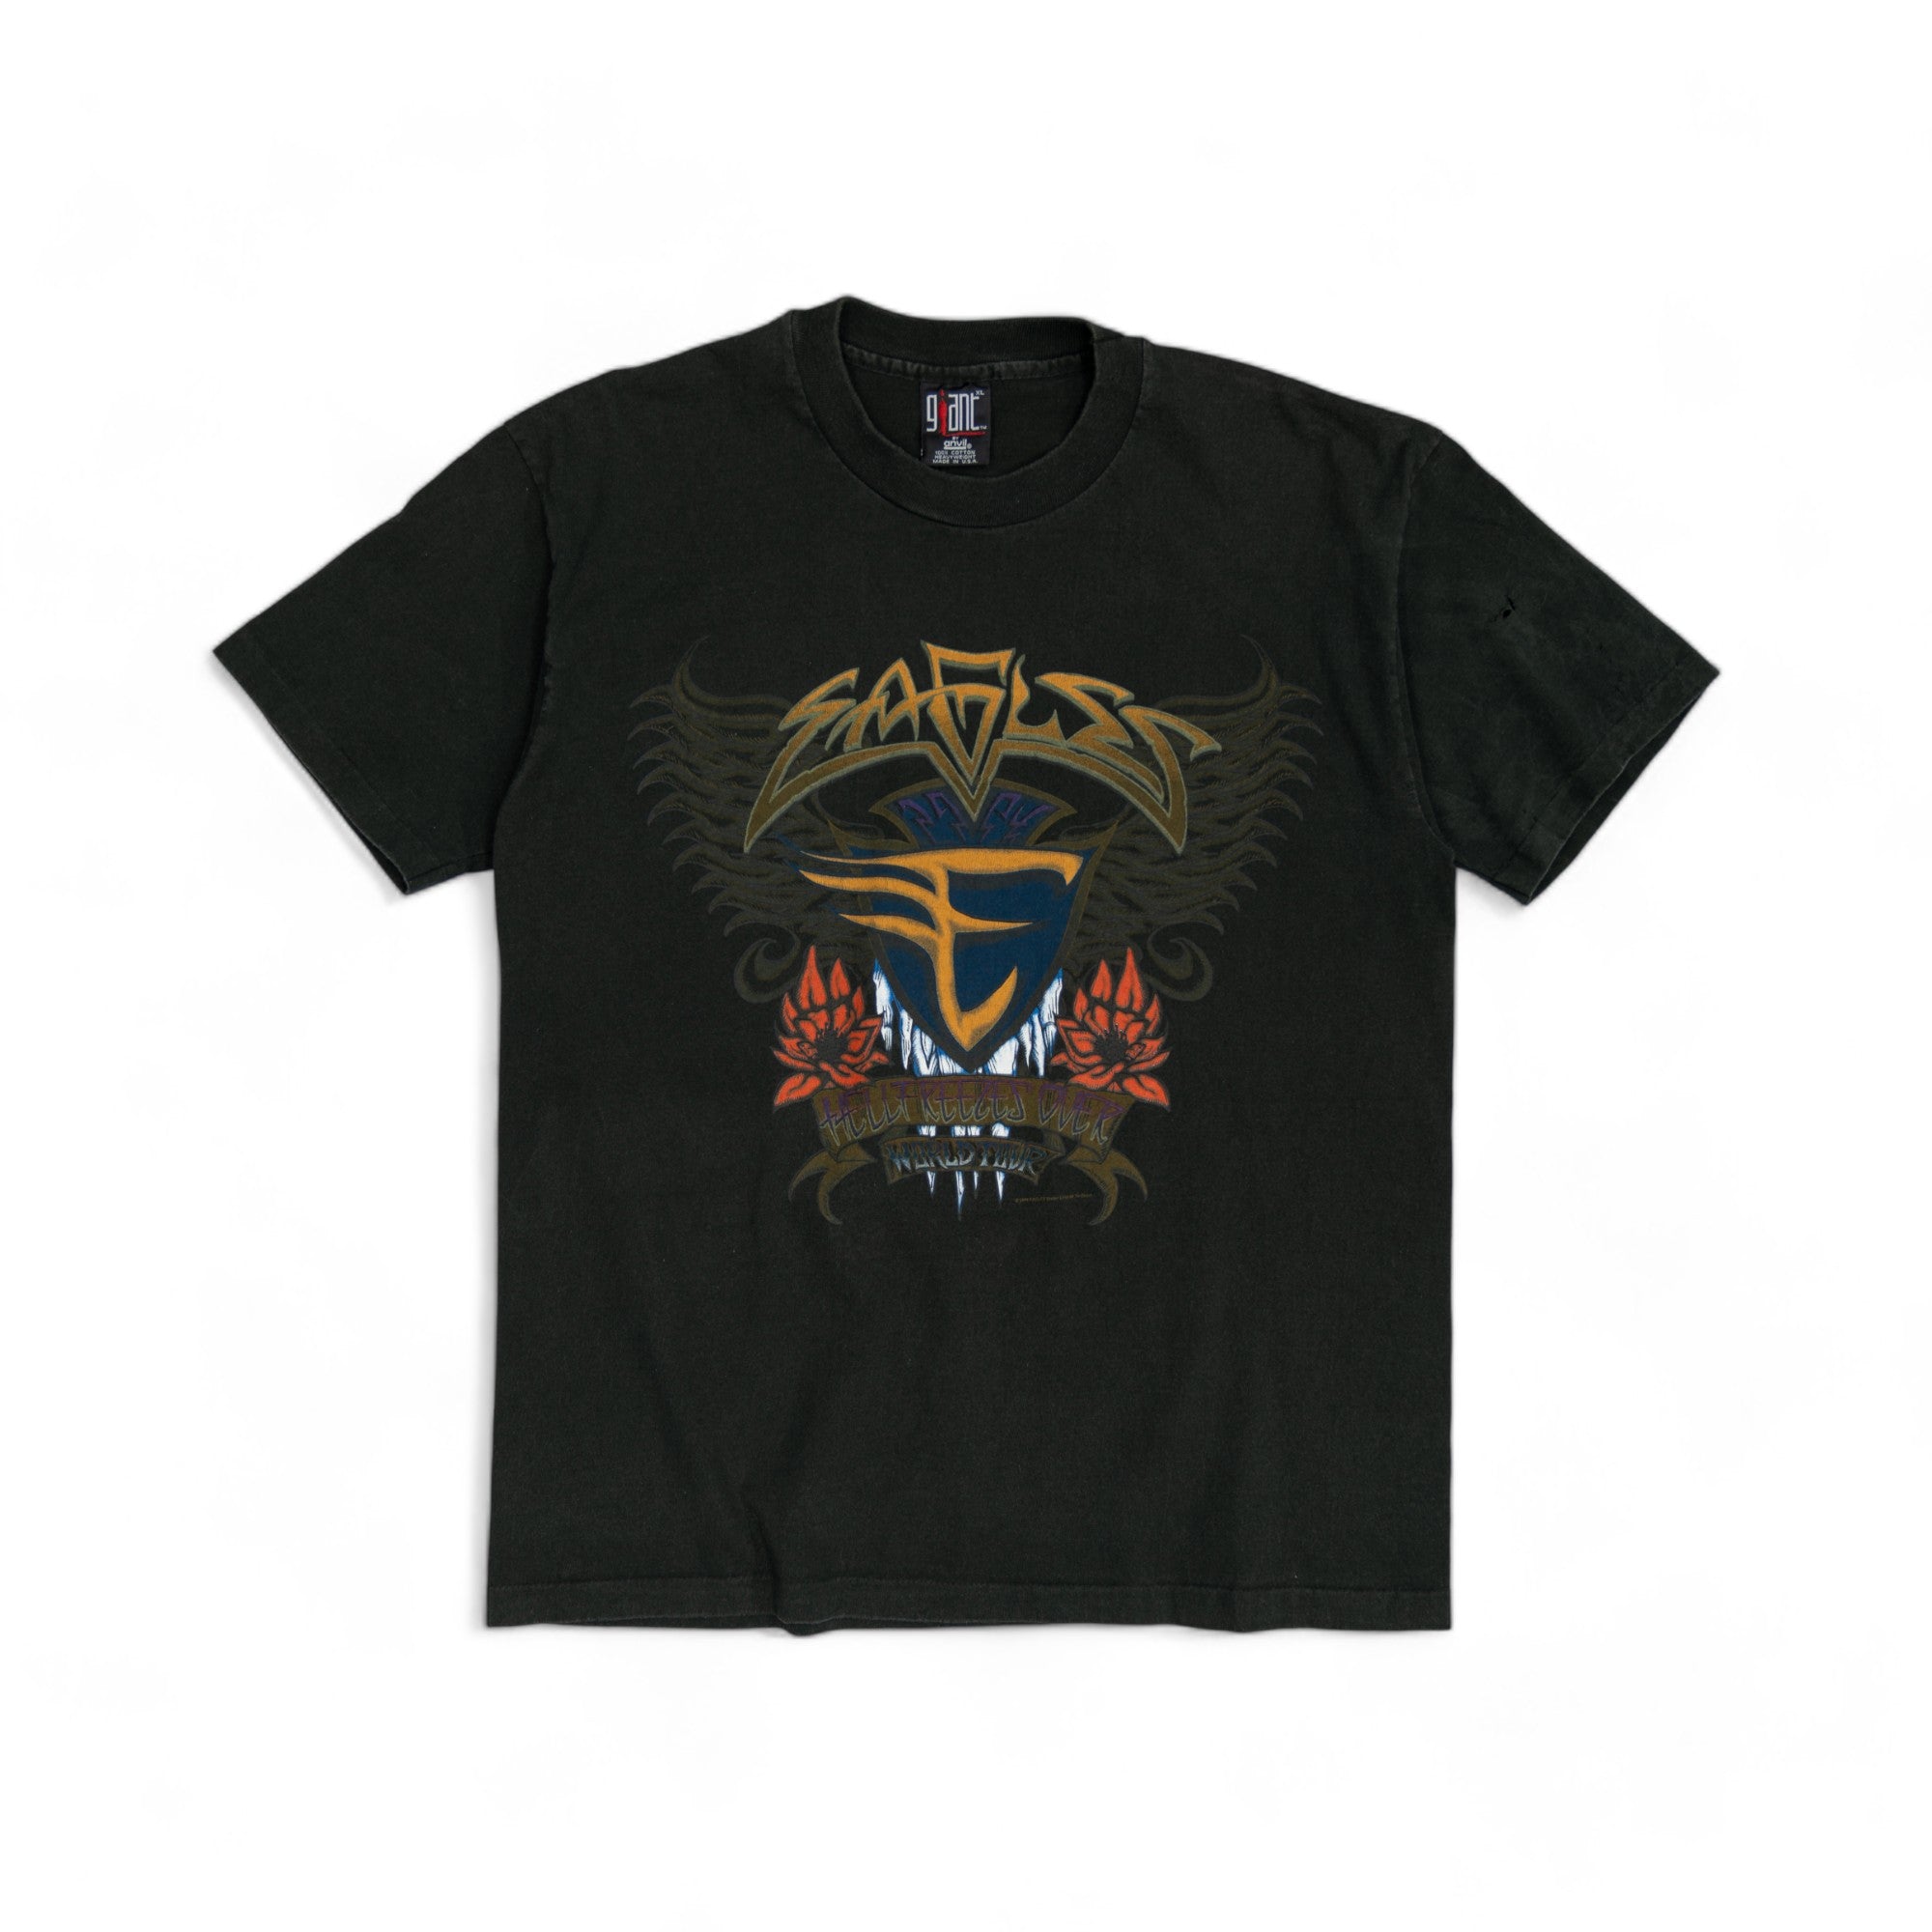 SINGLE STITCH EAGLES 'HELL FREEZES OVER' WORLD TOUR TEE - 1990'S